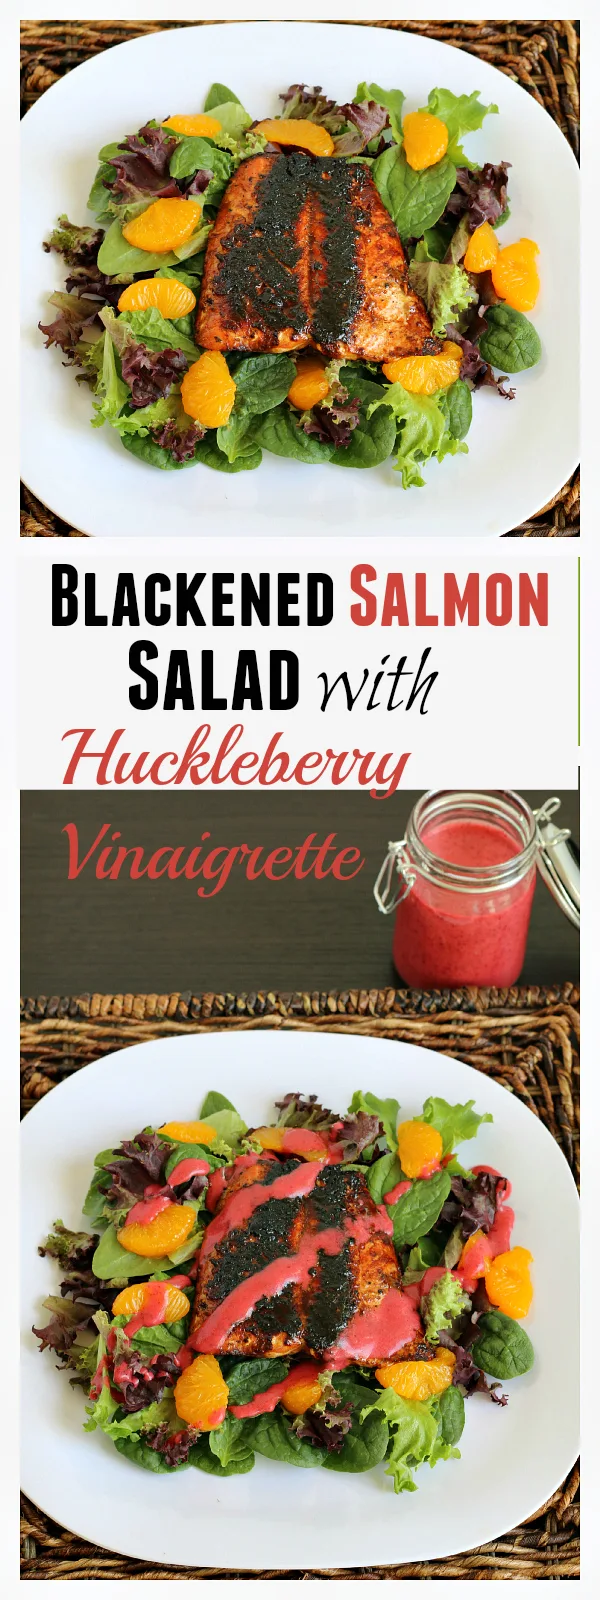 Blackened Salmon Salad with Huckleberry Vinaigrette - Easy, gluten-free dinner that the whole family loved. 45 minutes from start to finish!